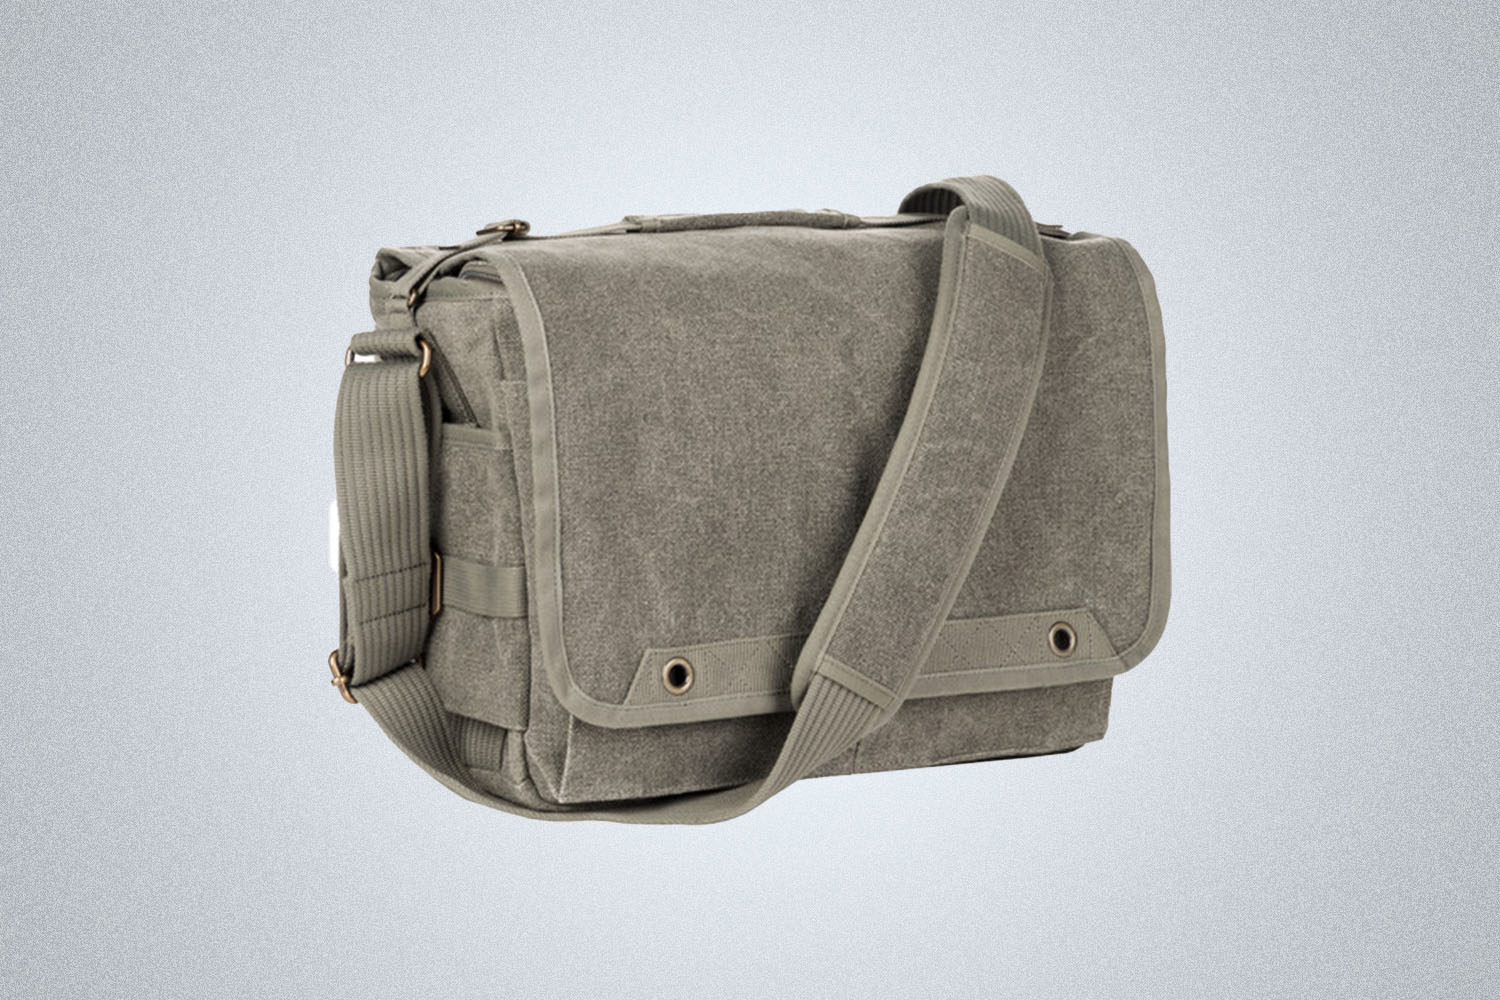 The Think Tank Shoulder Bag on a white background